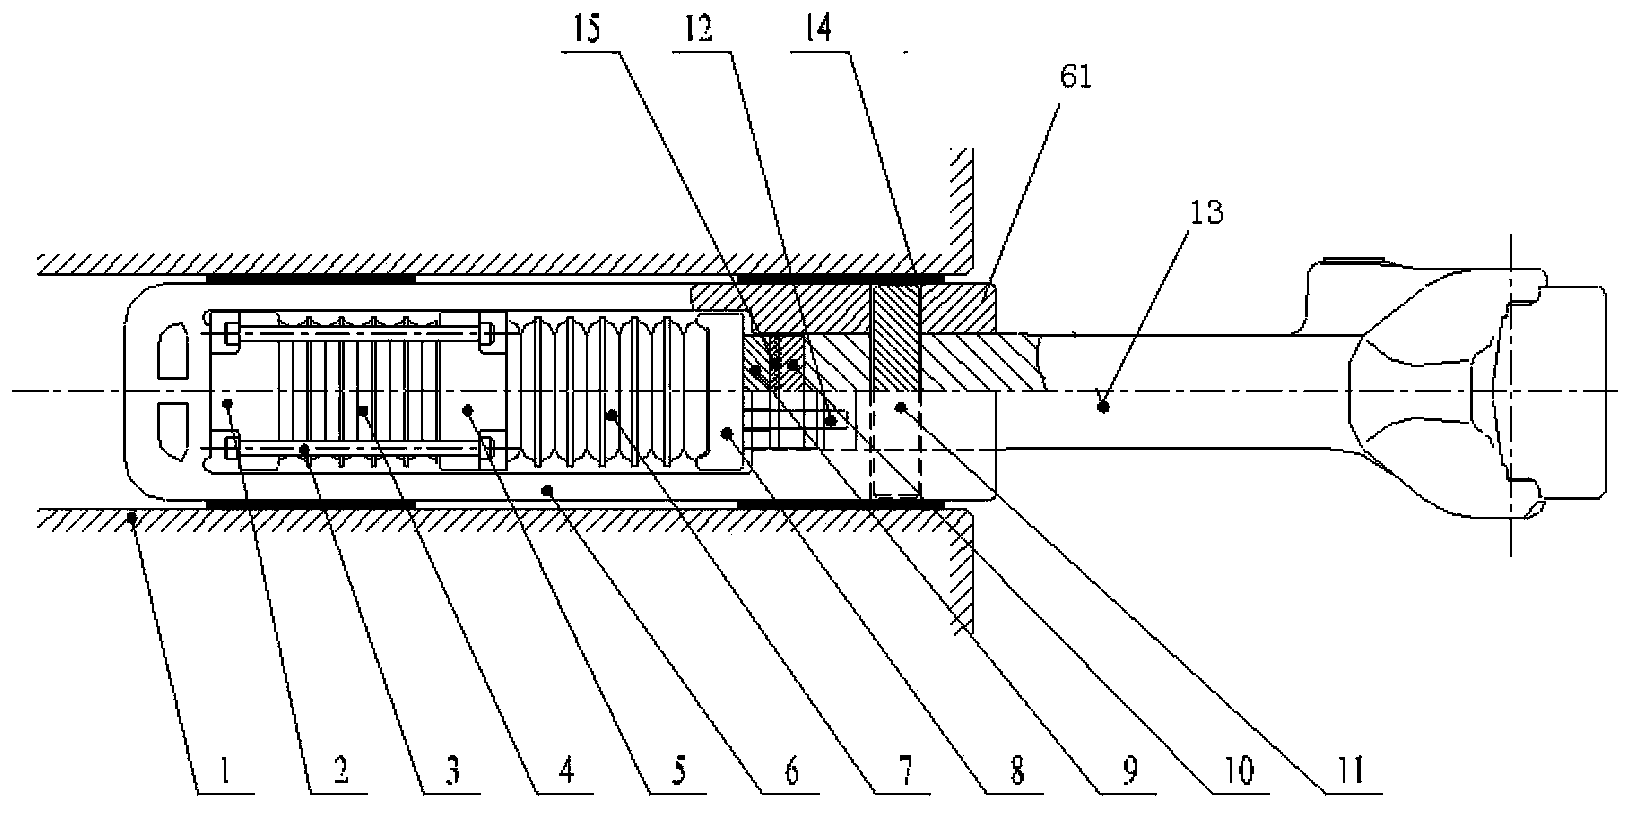 Heavy-load coupler with safety stop and low transverse force properties